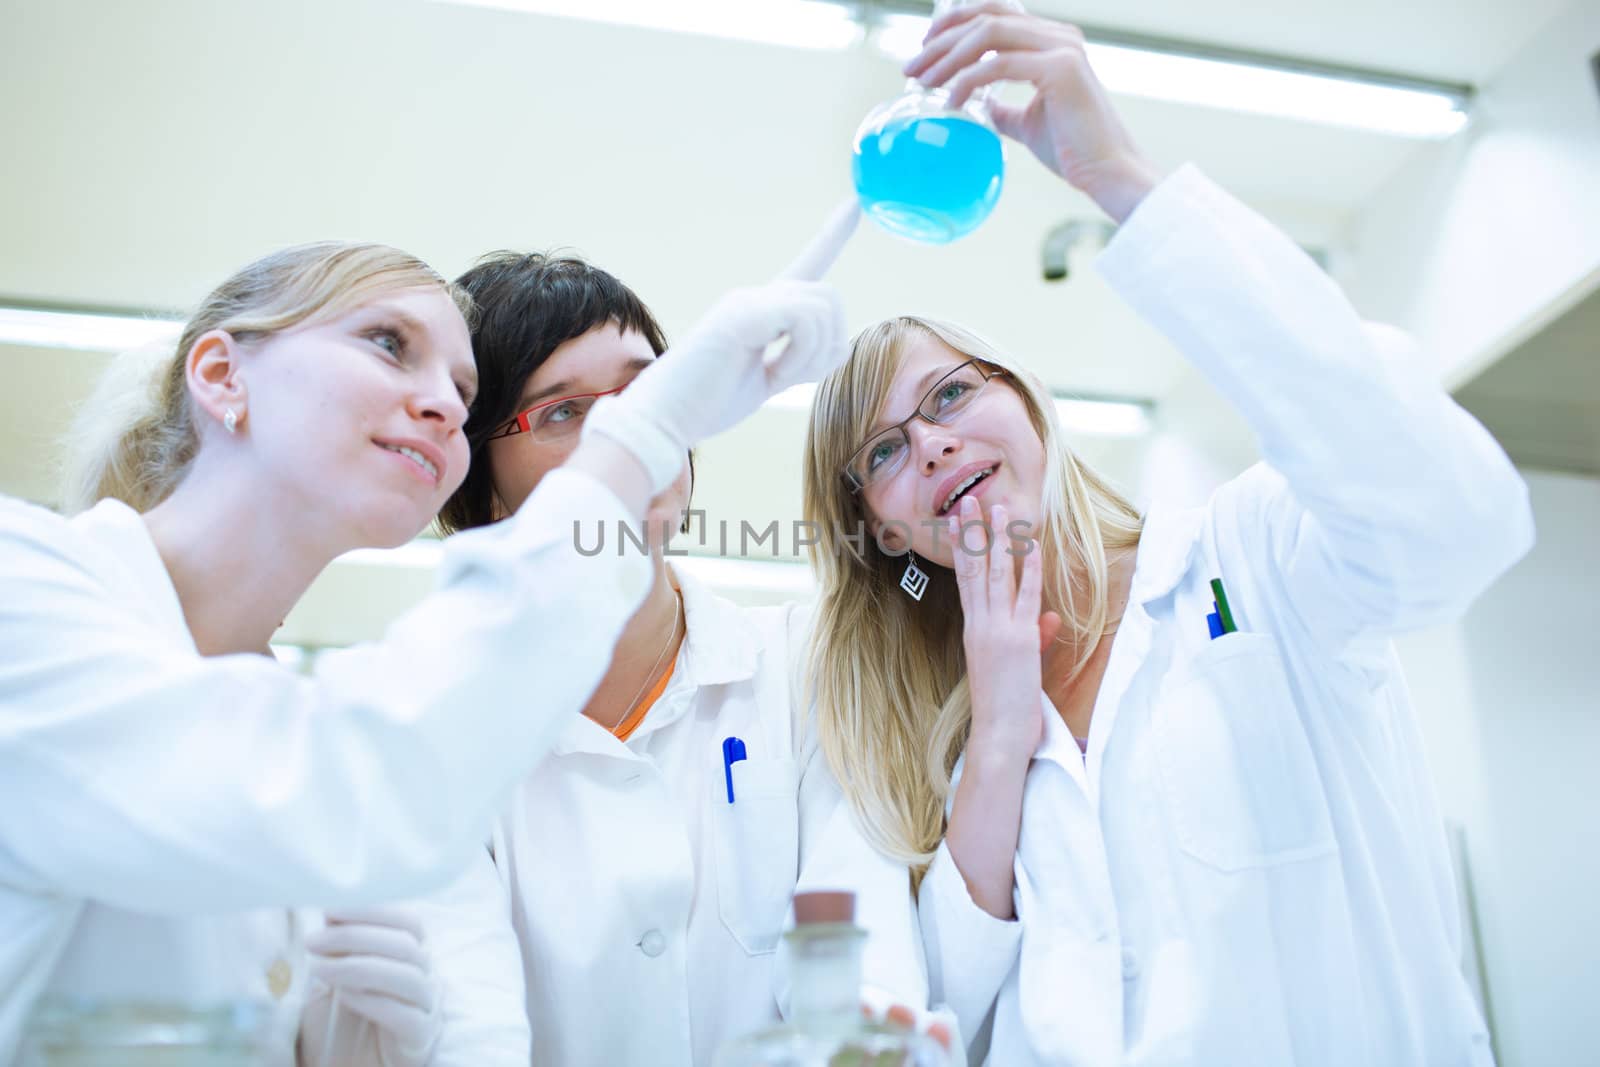 portrait of a female researcher carrying out research in a chemistry lab (color toned image; shallow DOF)